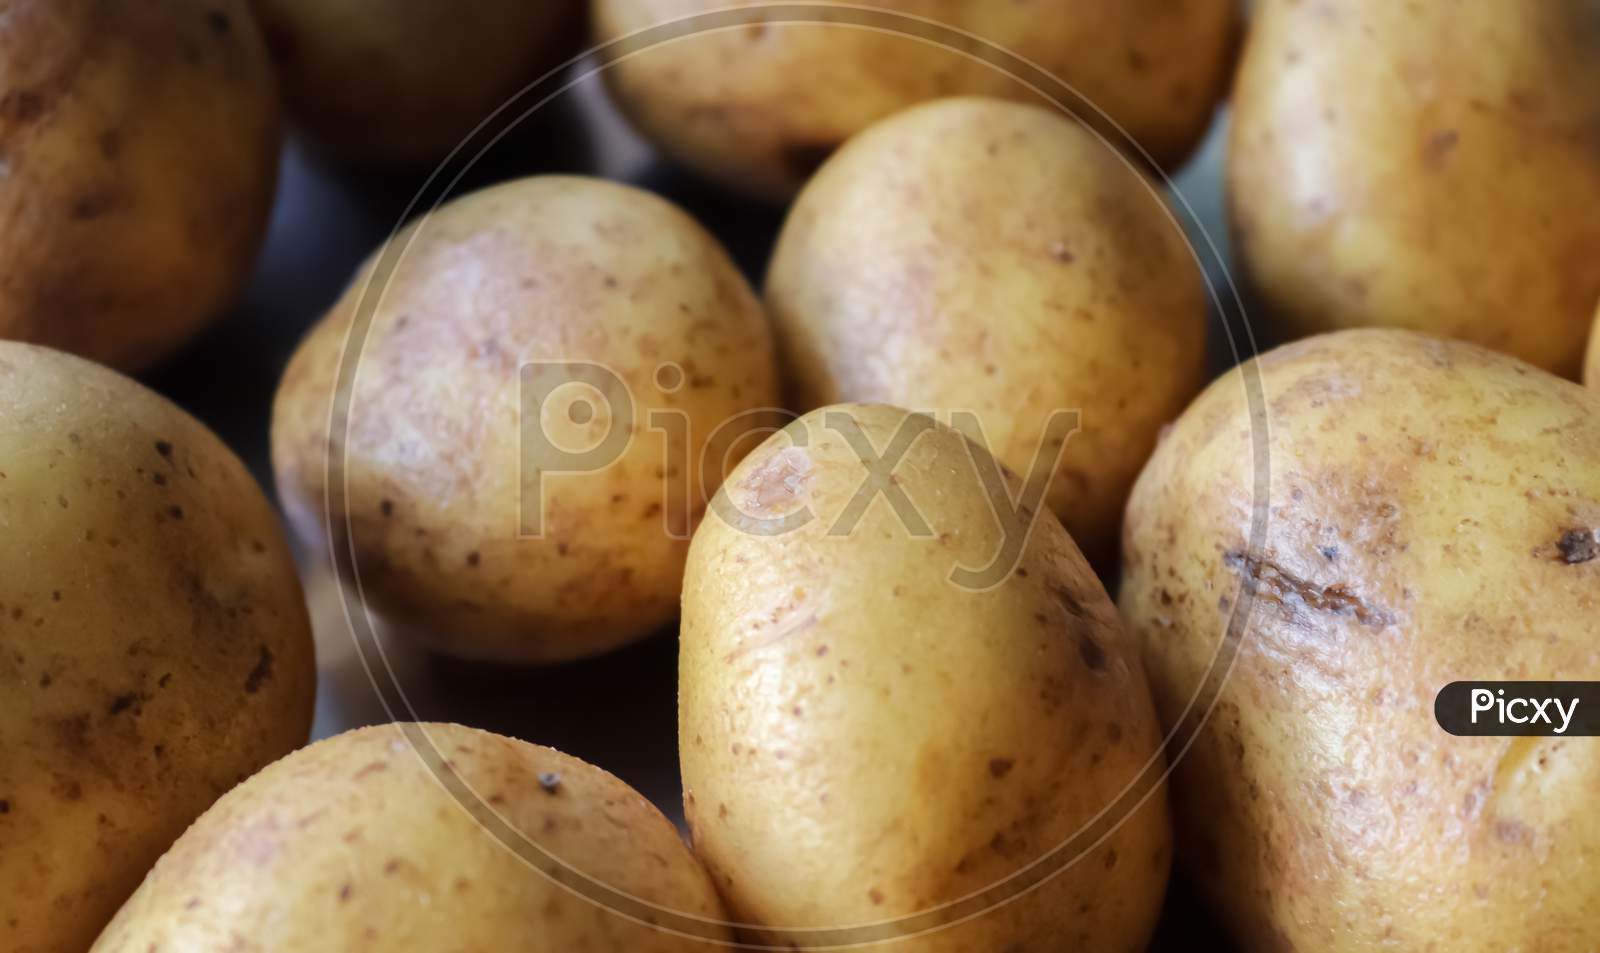 Top View At Uncooked Potatoes On A Metallic Surface. Kitchen Concept